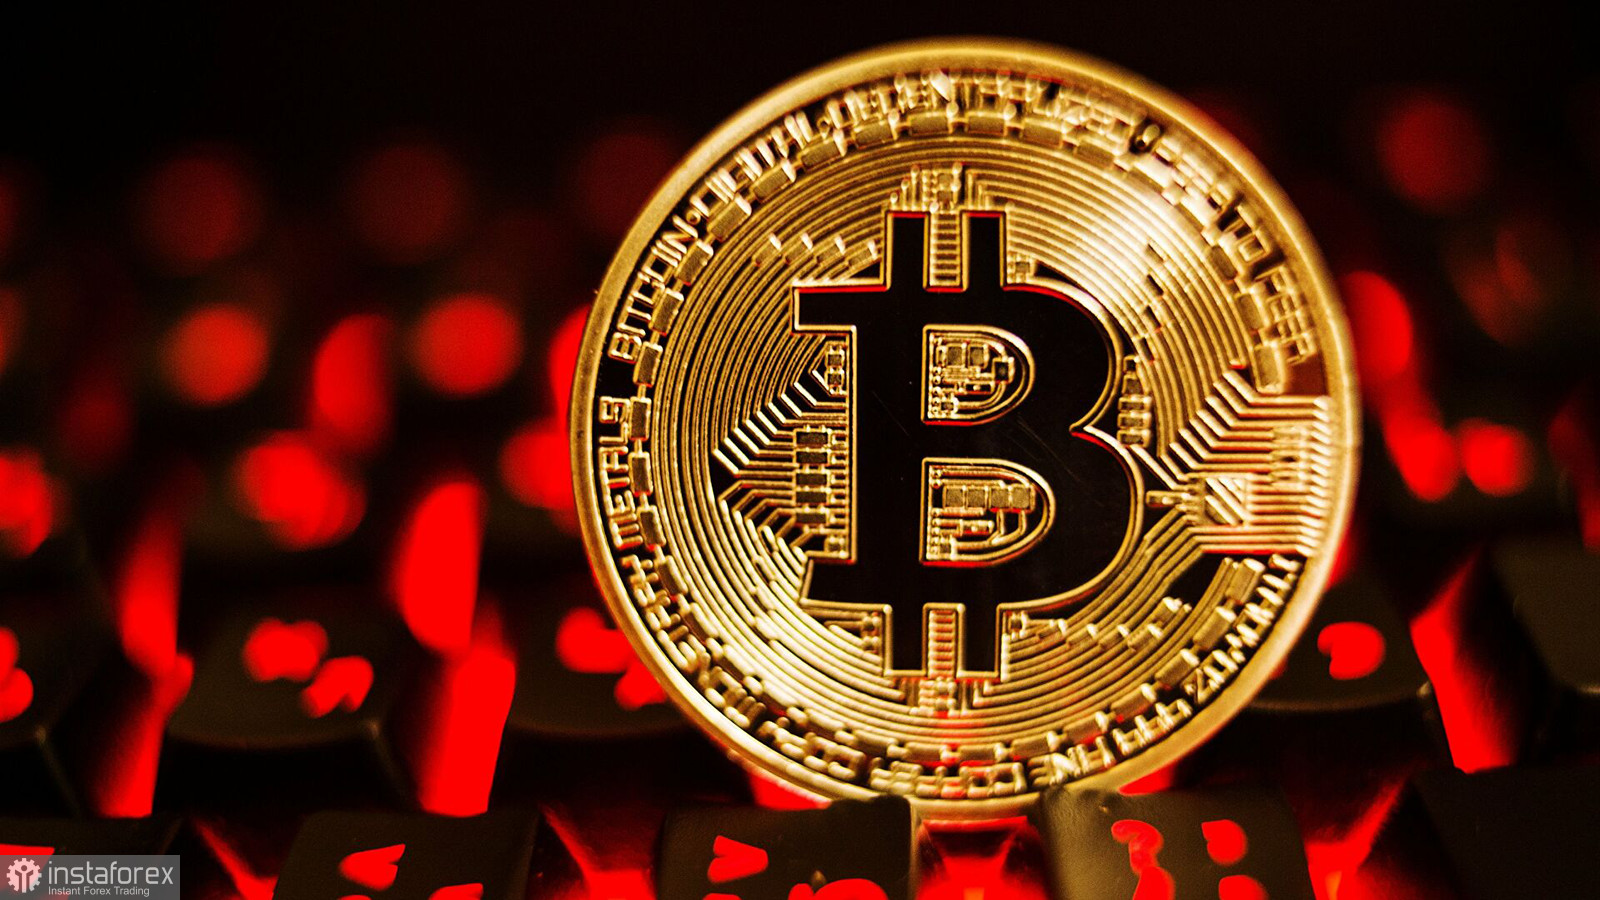 Bloomberg and Goldman Sachs are waiting for bitcoin to grow.